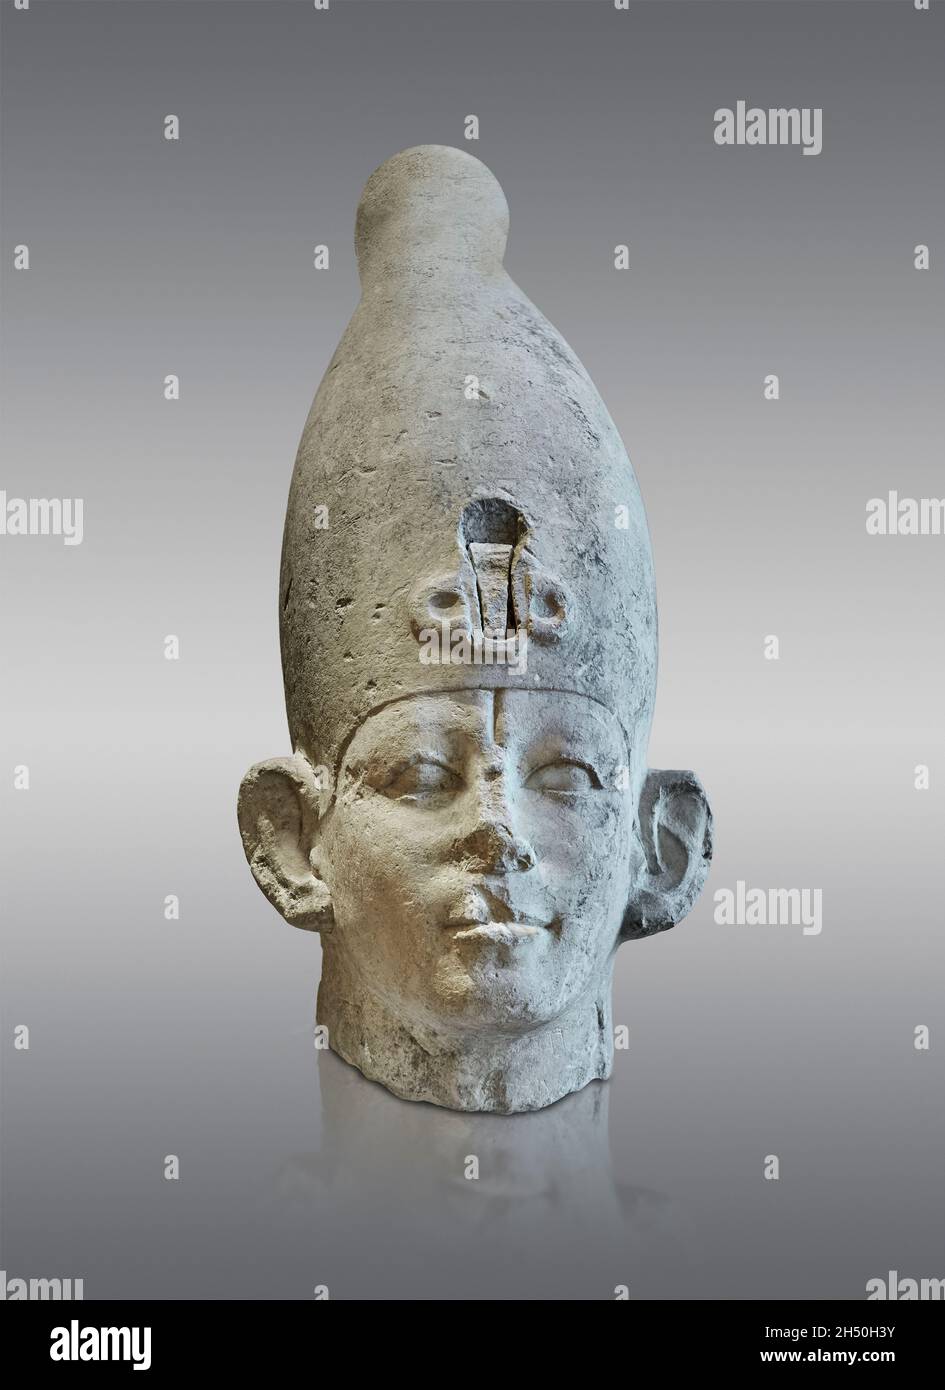 Egyptian statue sculpture of Pharaoh with white crown, 1862-1843 BC, 13th Dynasty. Louvre Museum E12924. King Sekhemre Khutawy Sobekhotep.    Found at Stock Photo